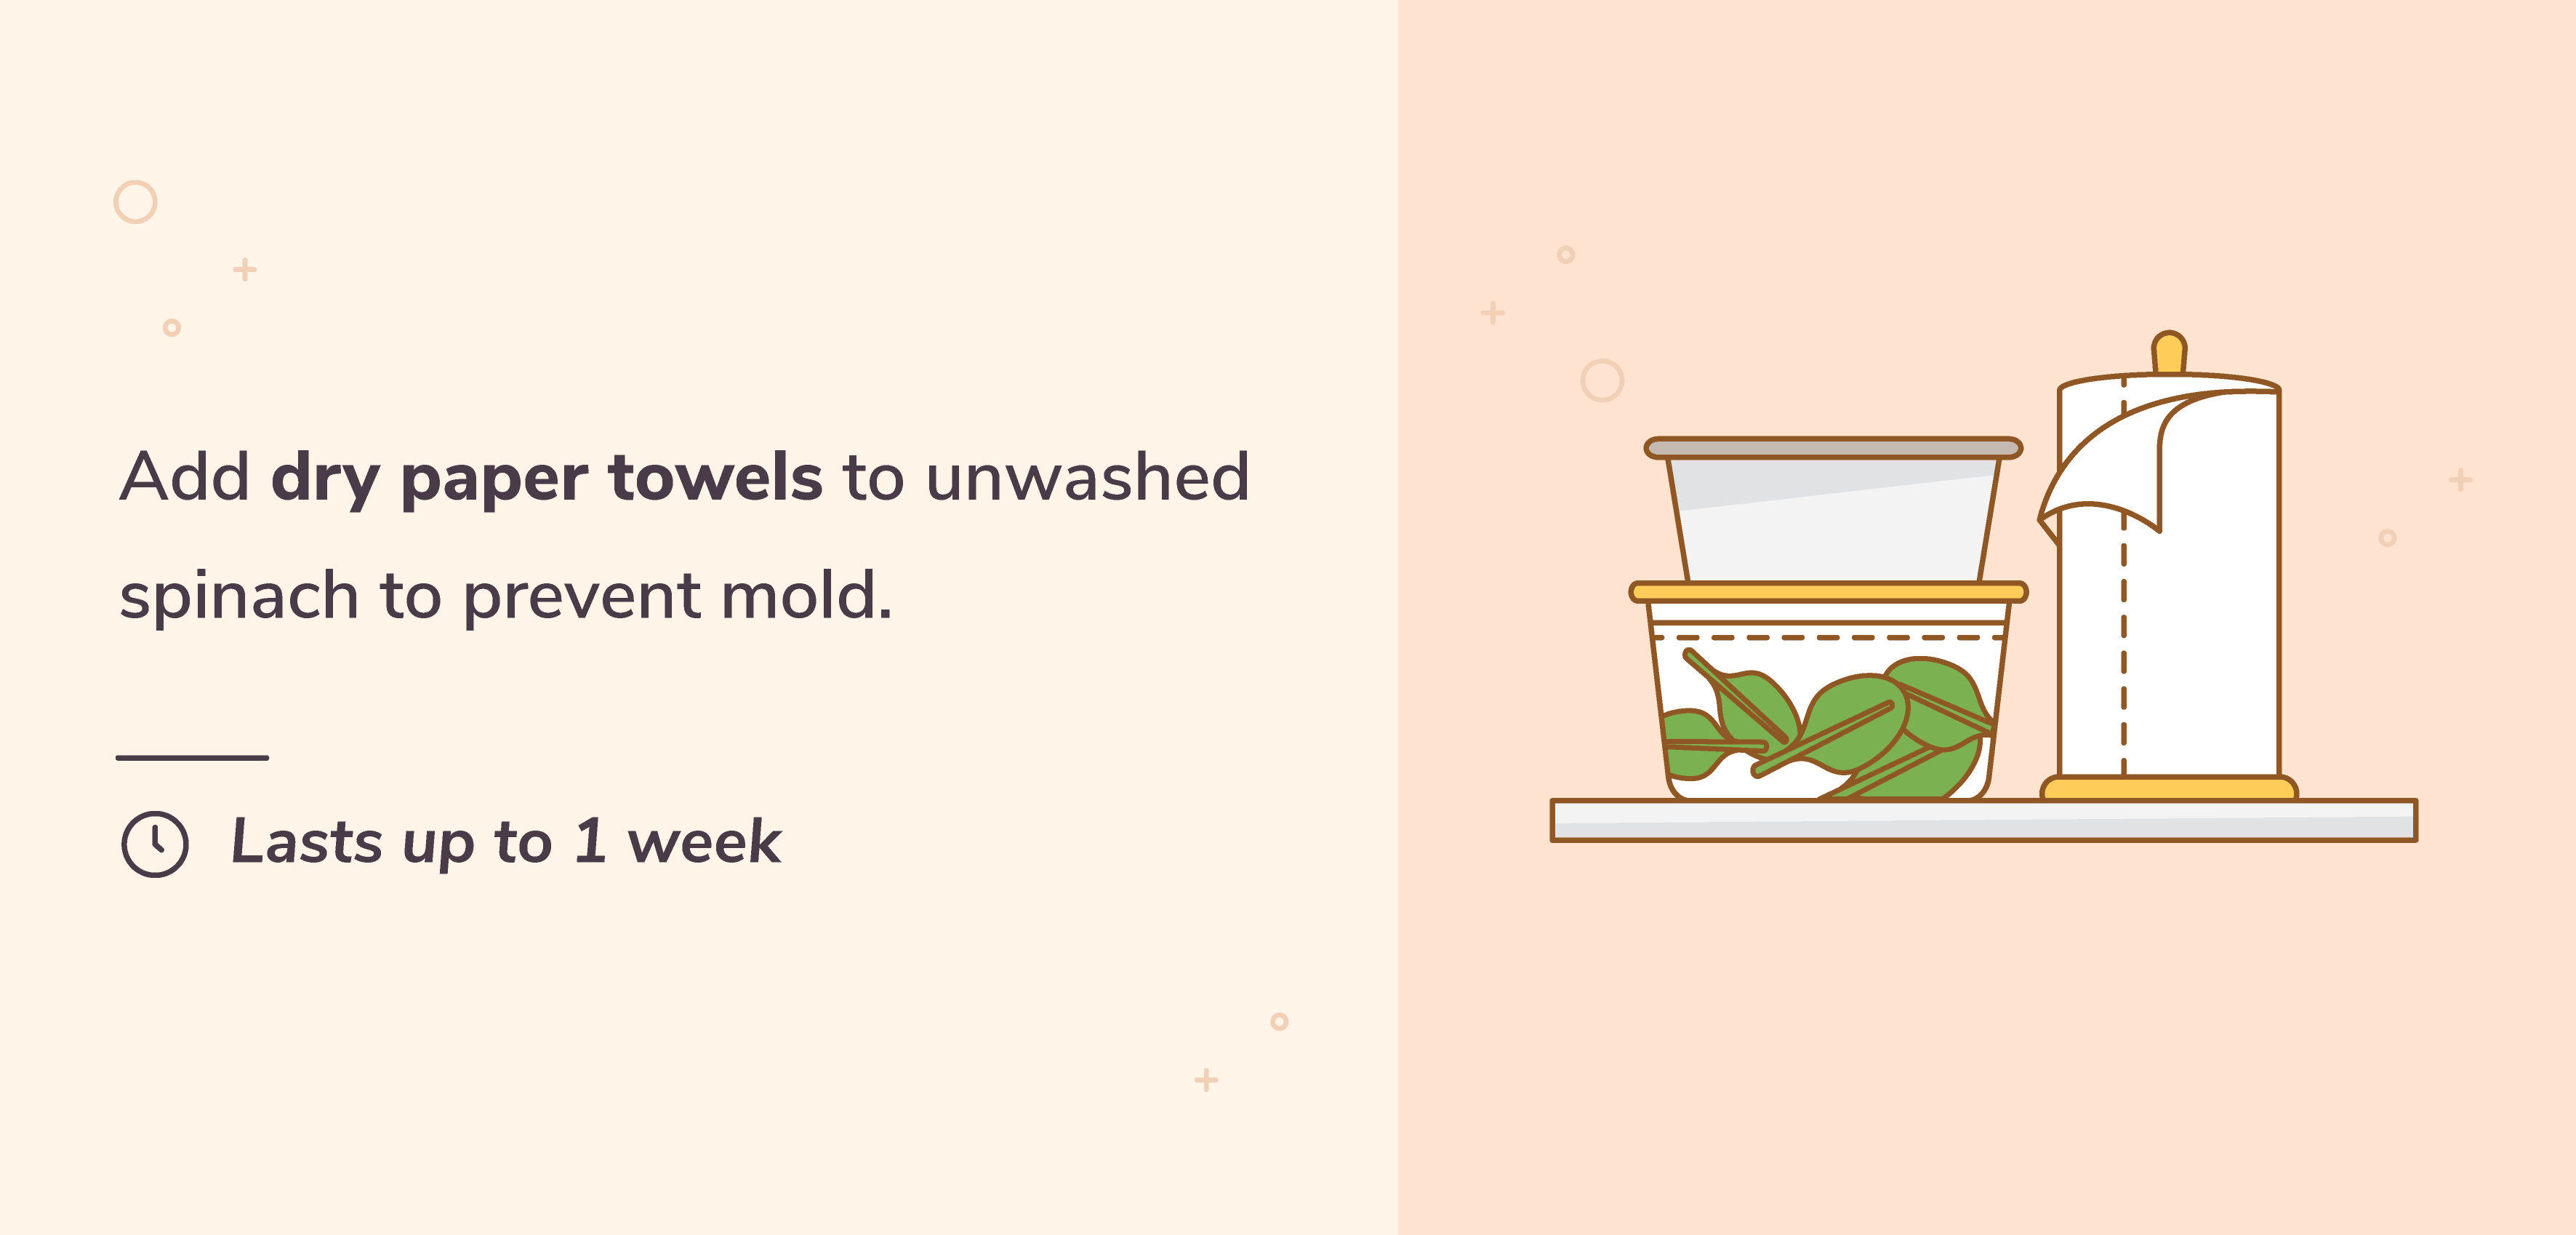 Add dry paper towels to a container with spinach and store it in the fridge for up to a week.